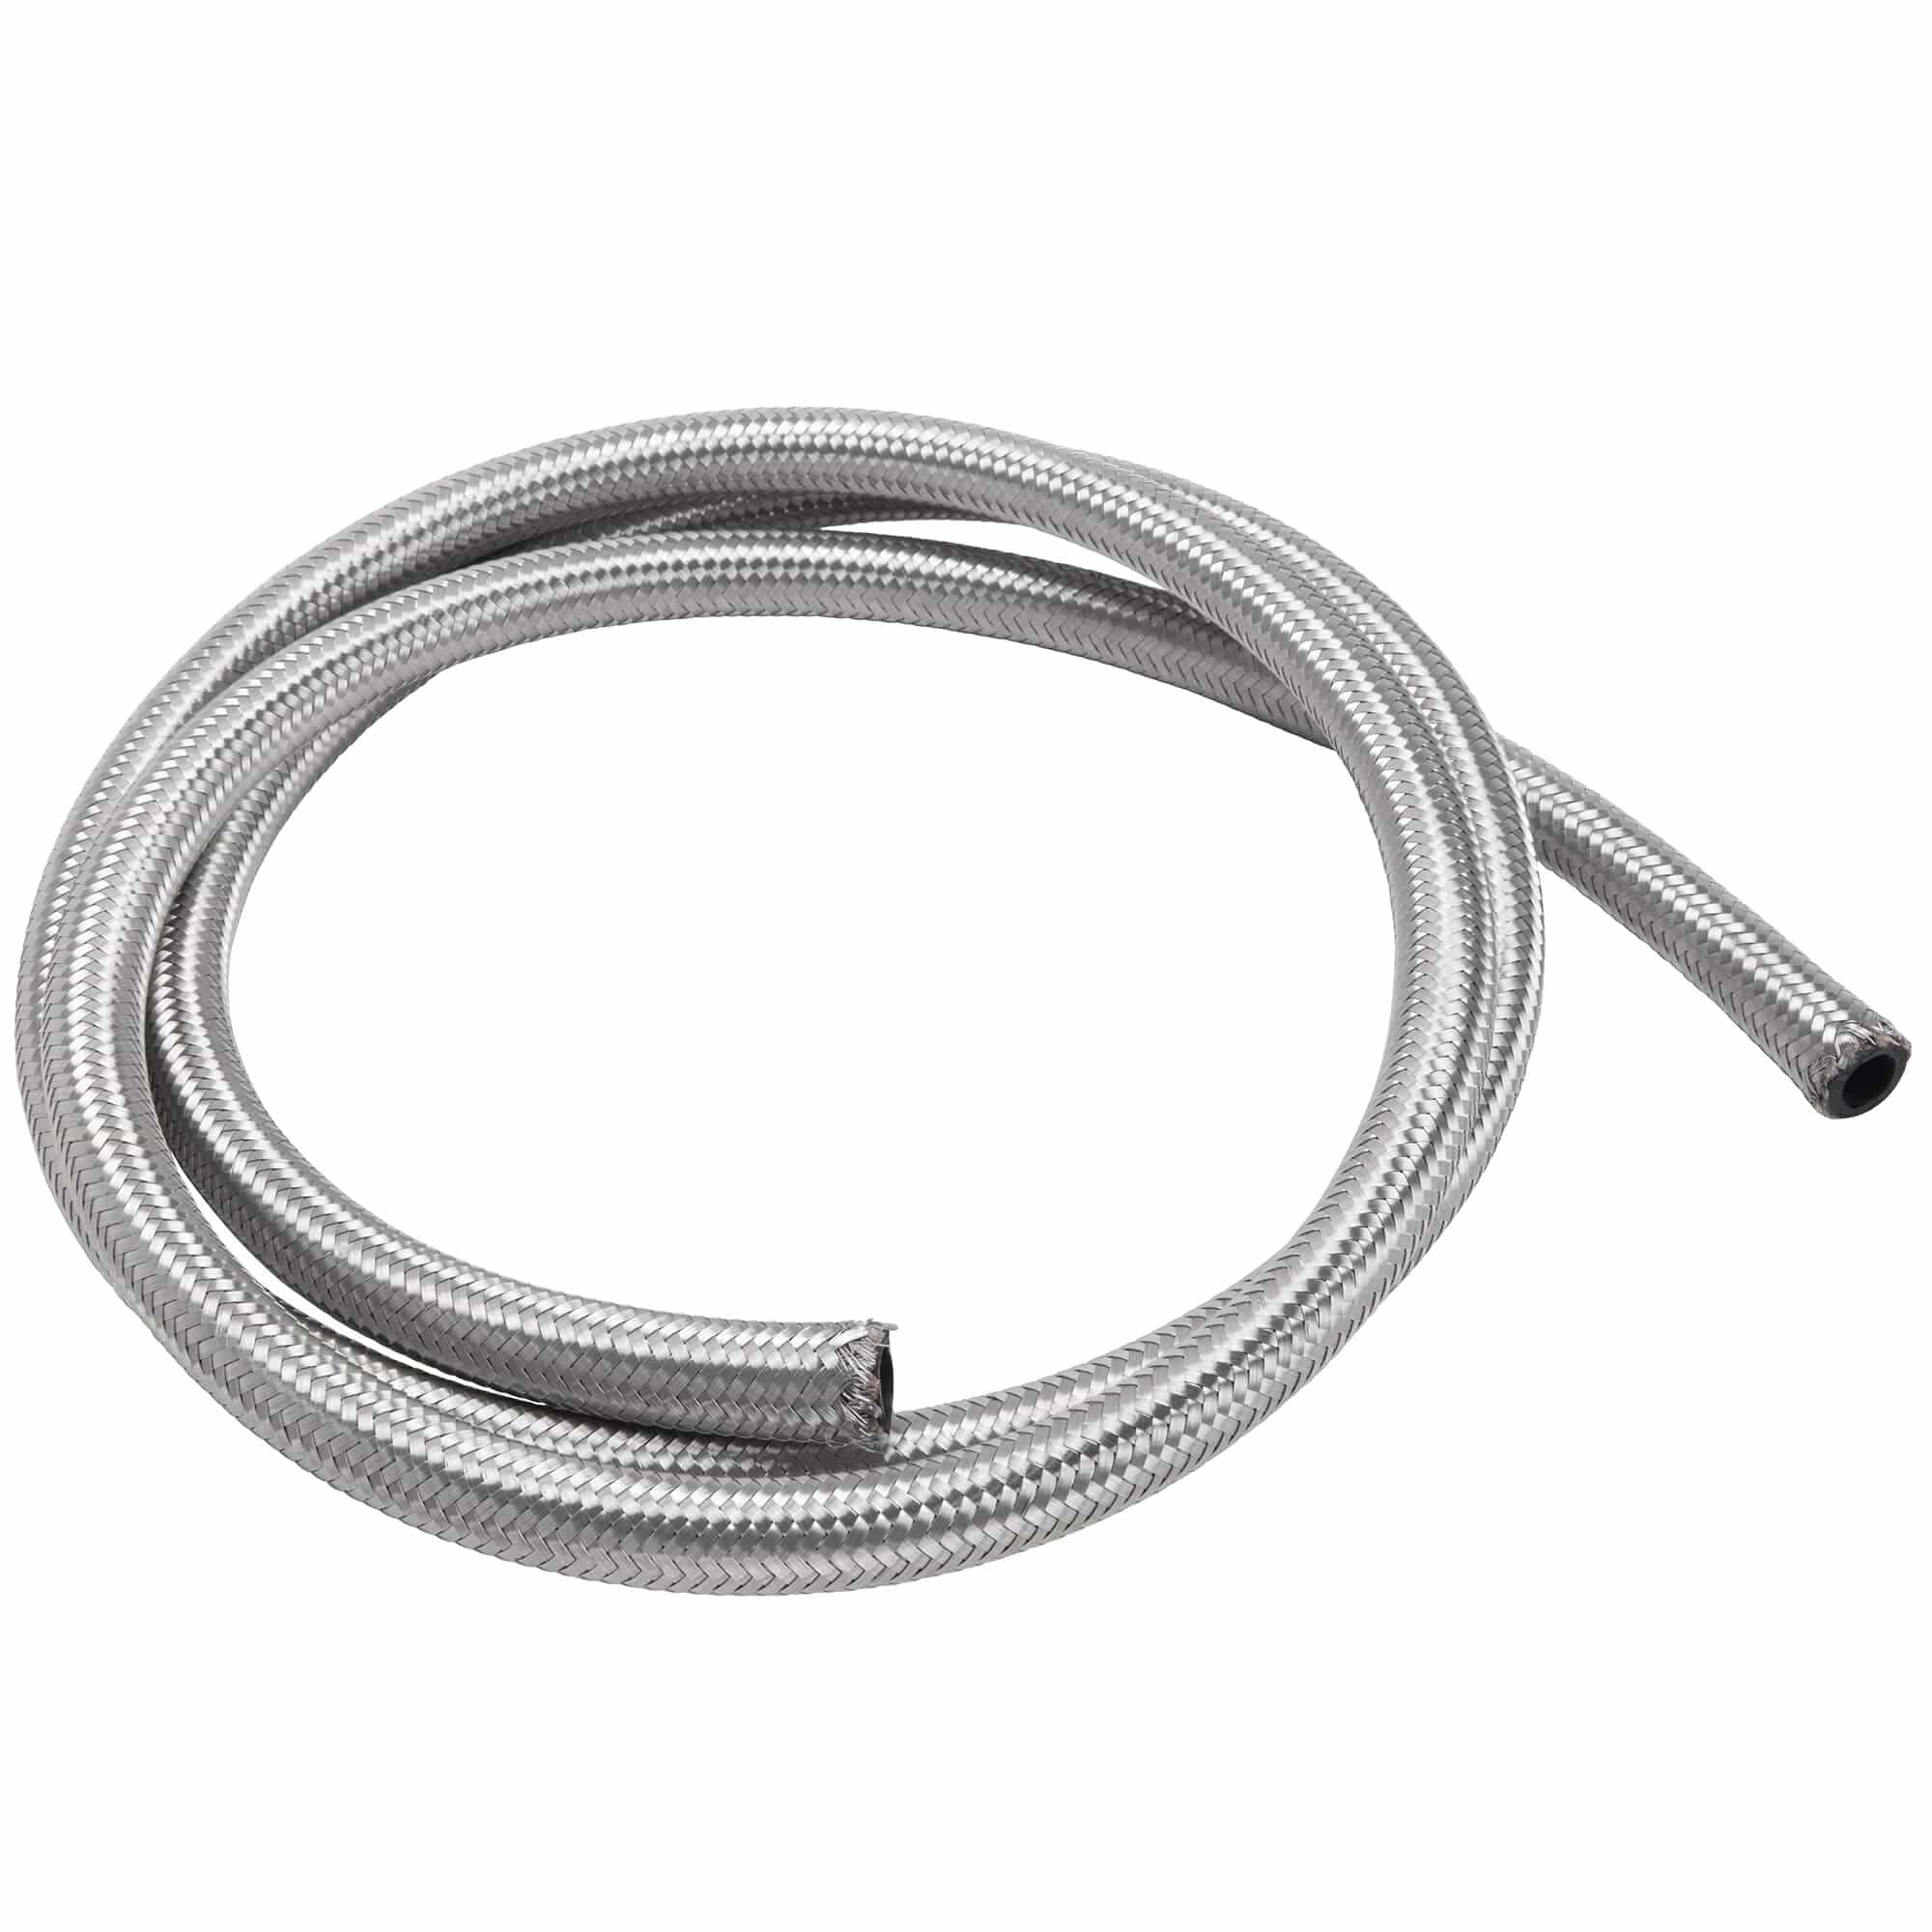  Braided Stainless Oil Line Fuel Hose By The Foot, 5/16 Inch :  Automotive